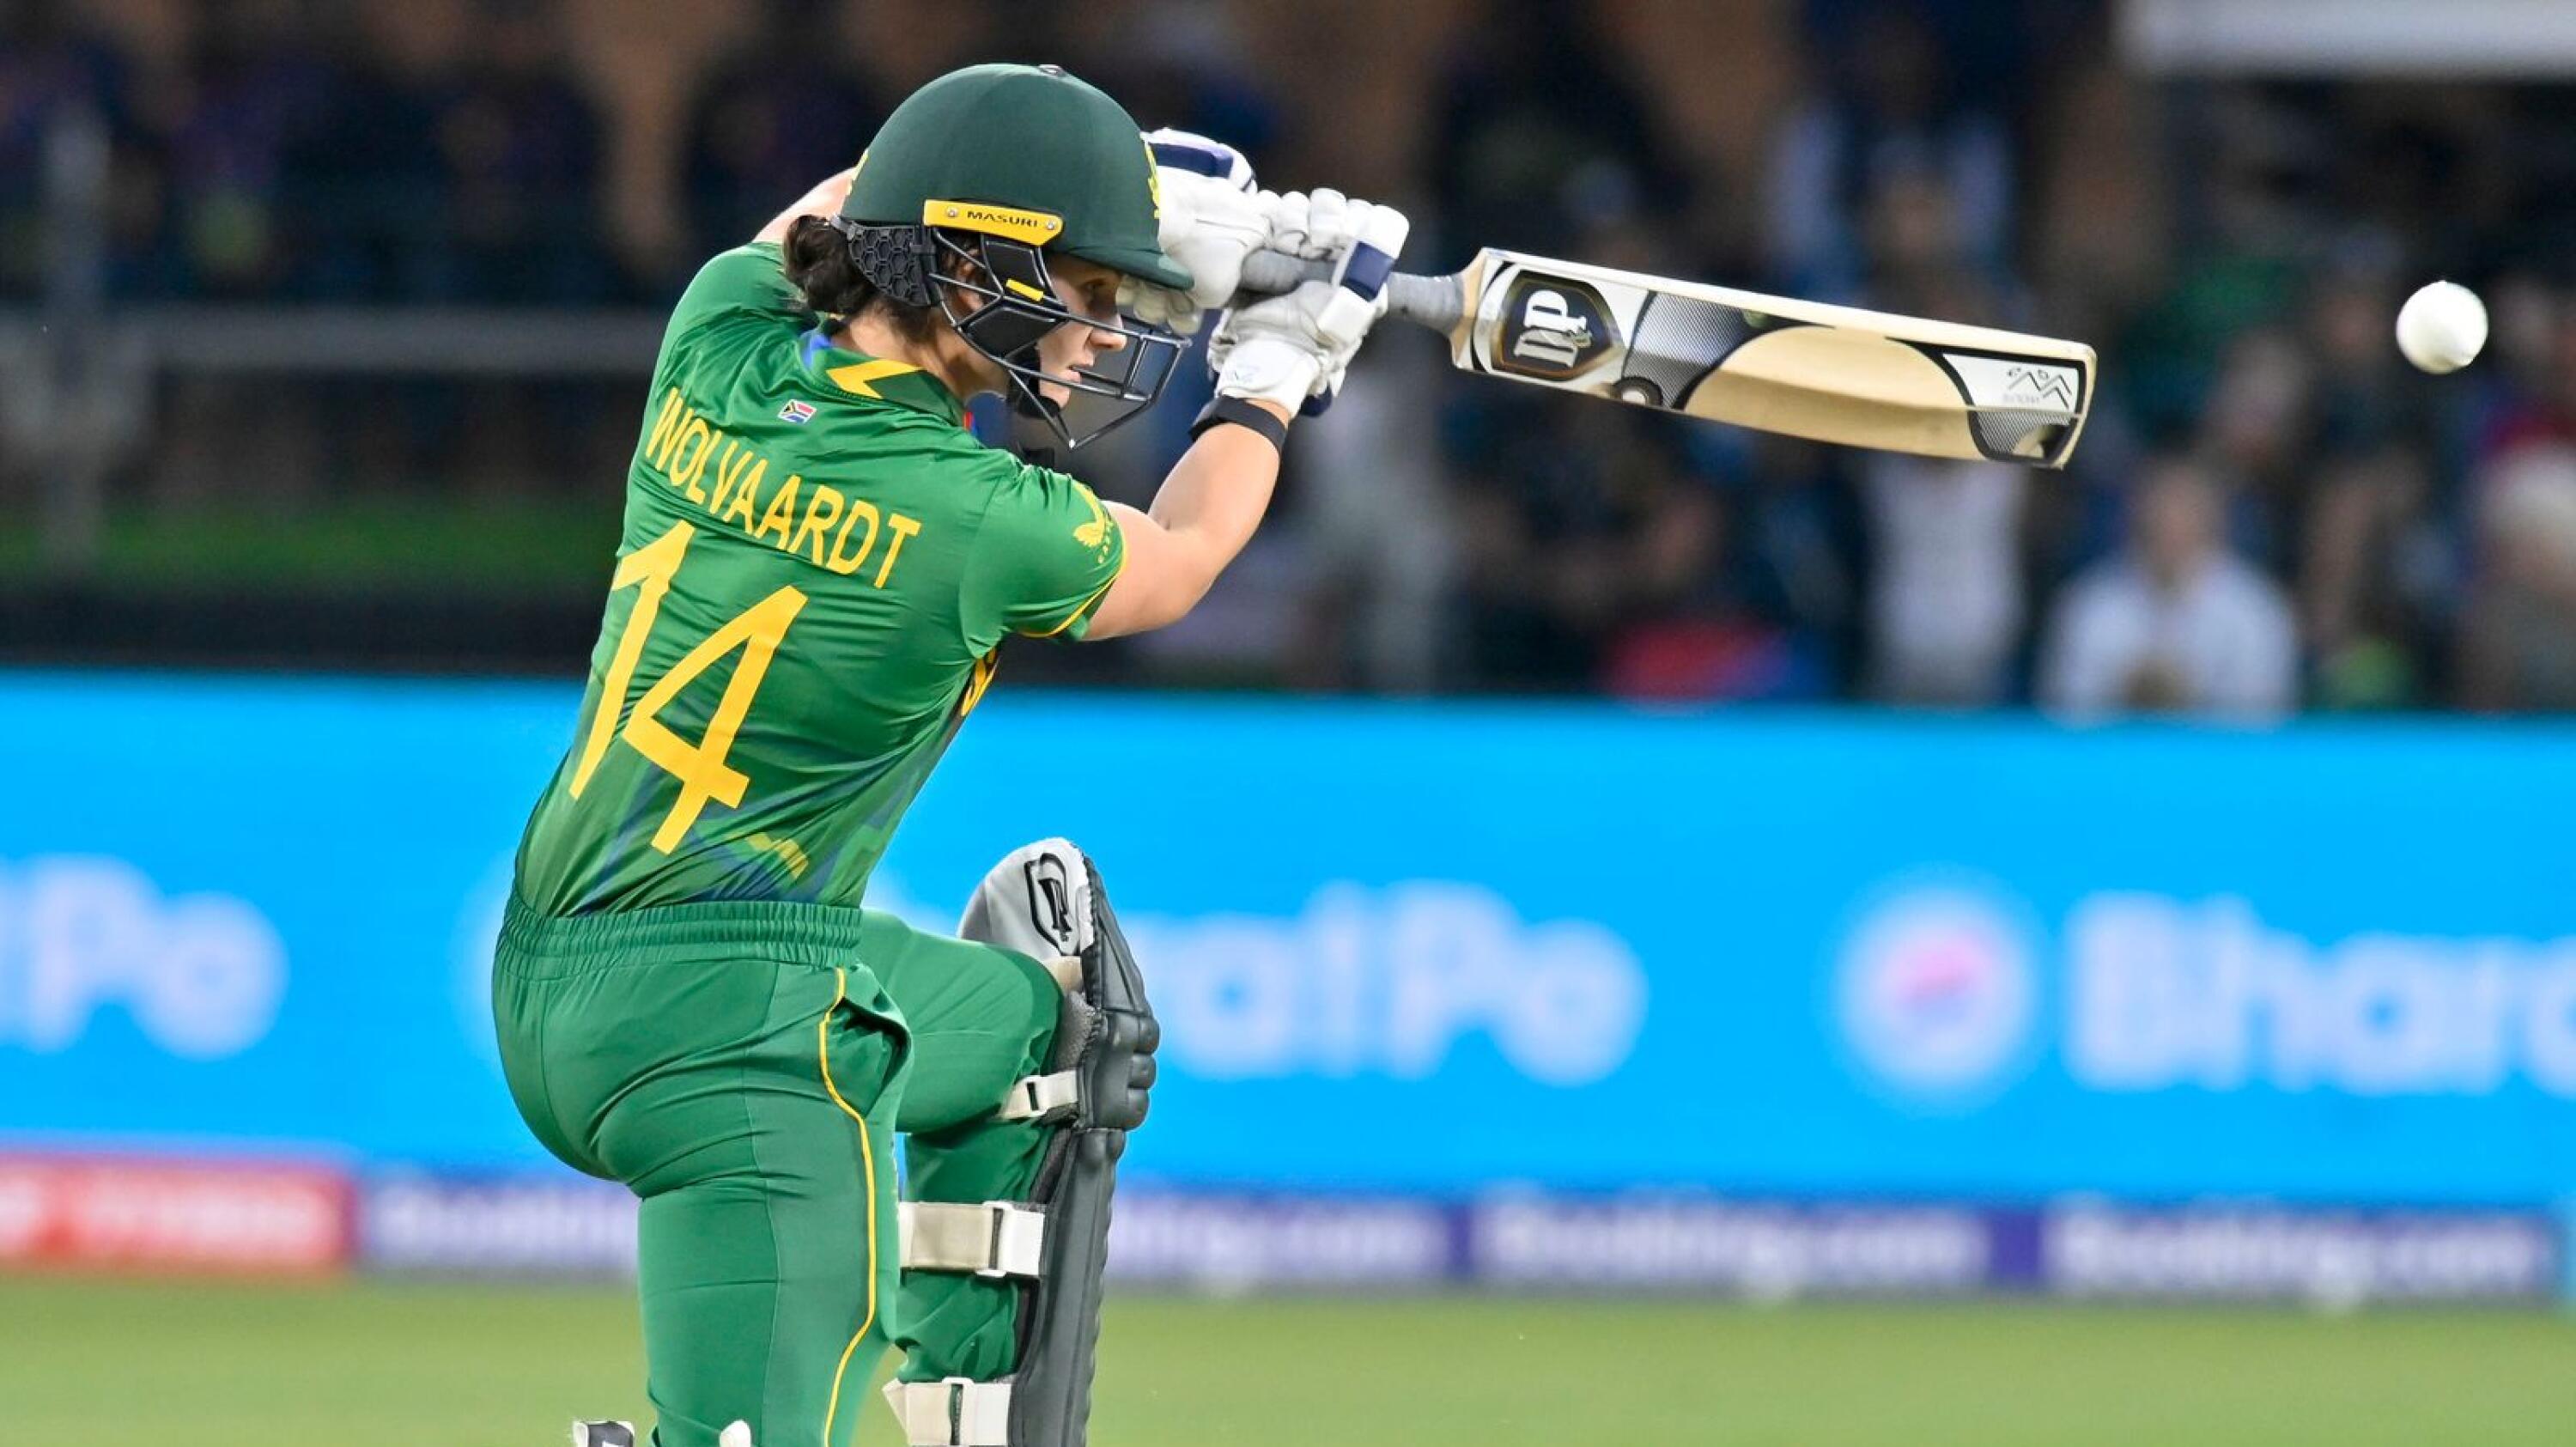 Laura Wolvaardt simply needs to be batting in the middle order if the Proteas’ fortunes are to change at the T20 World Cup.